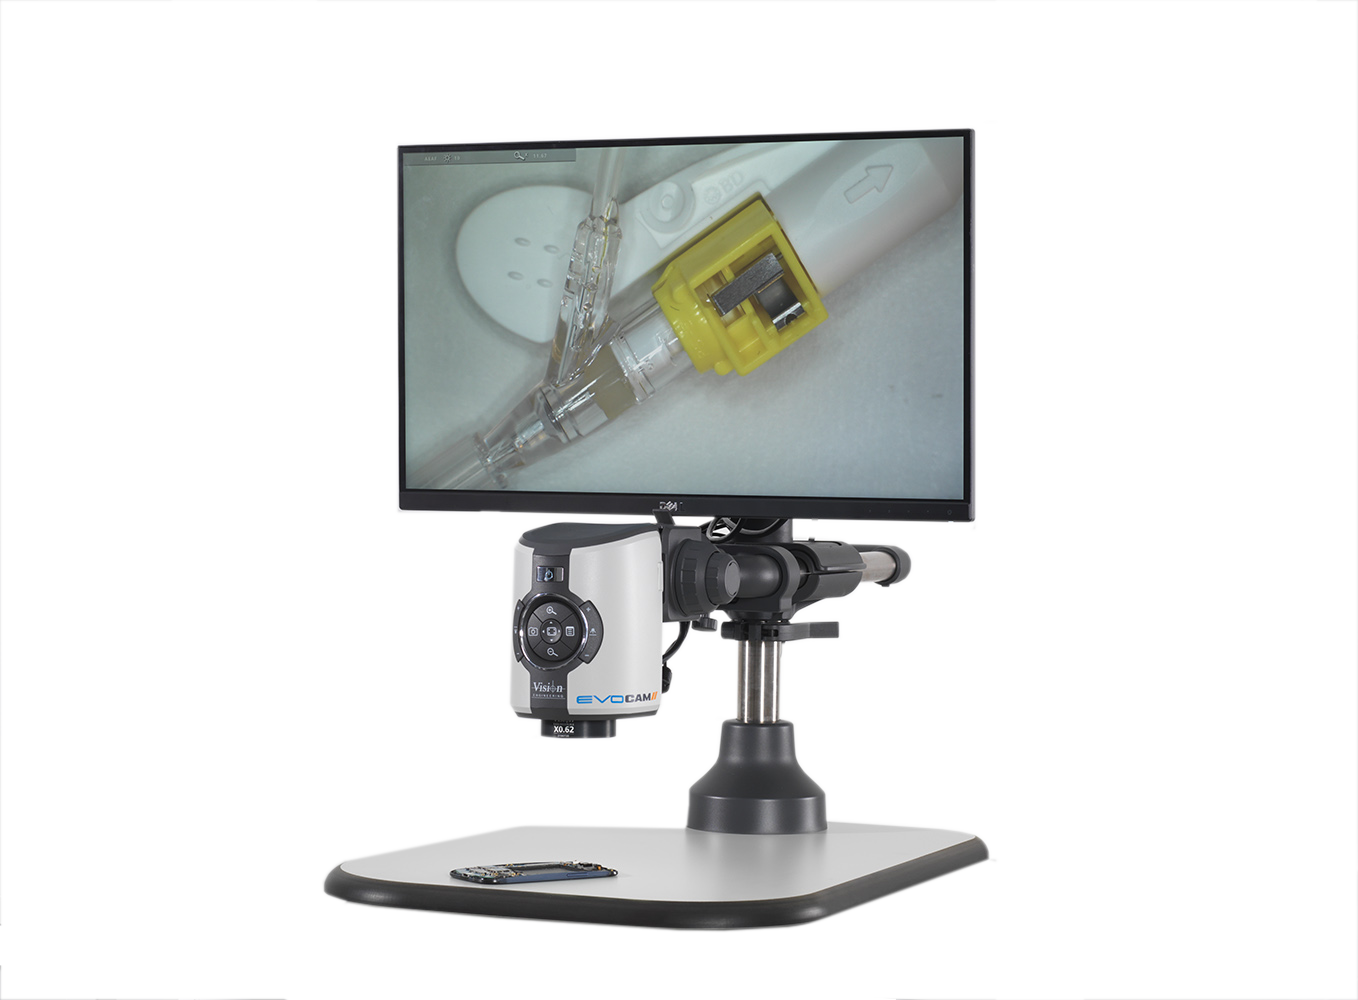 EVO Cam II with monitor displaying a medical device